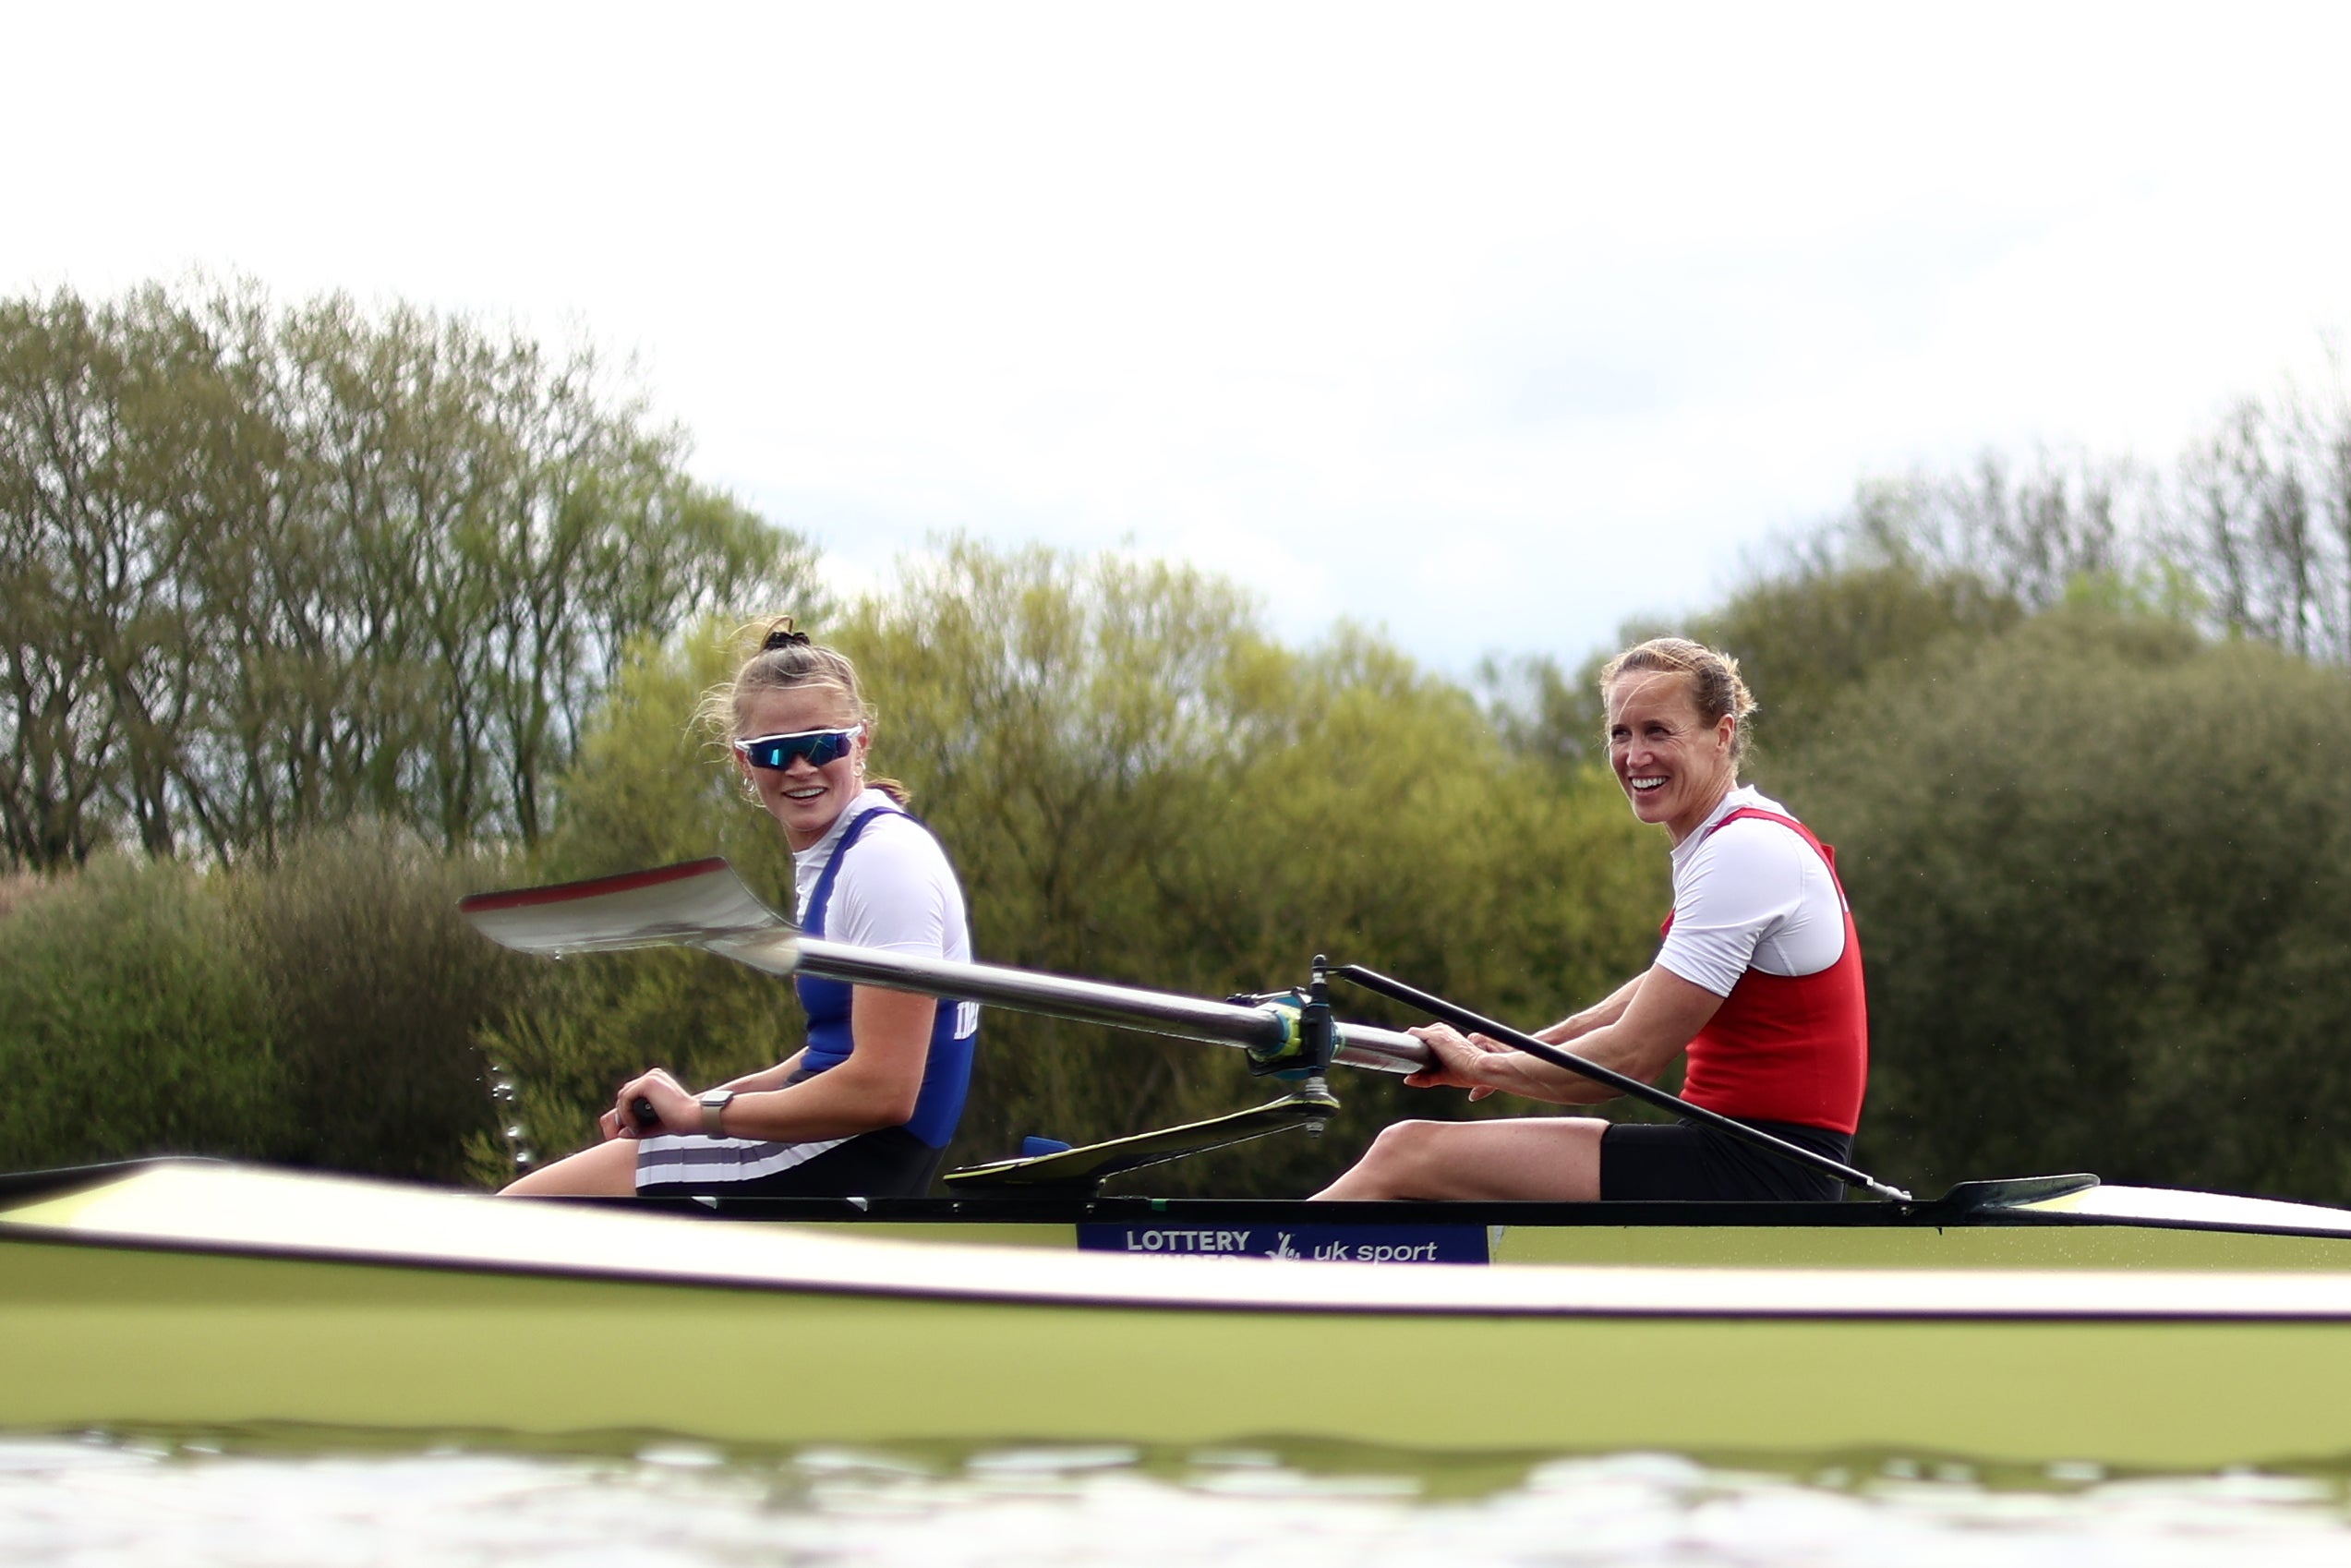 Helen Glover combined with Rebecca Shorten to win the pairs title at April’s British Trials